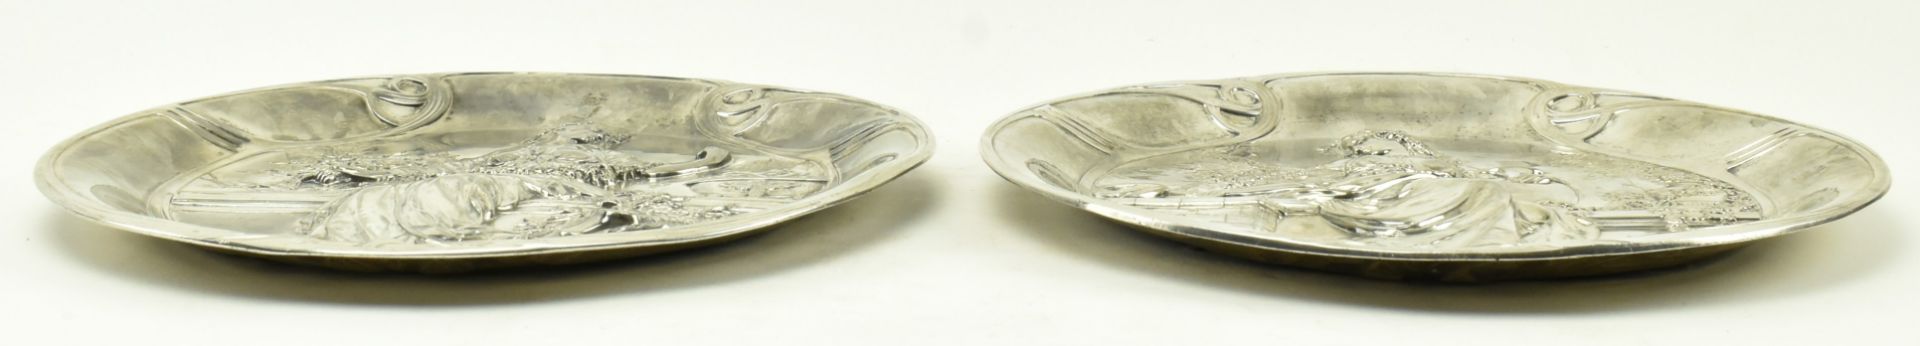 PAIR OF WMF ART NOUVEAU SILVER PLATED ALLEGORICAL CHARGERS - Image 5 of 9